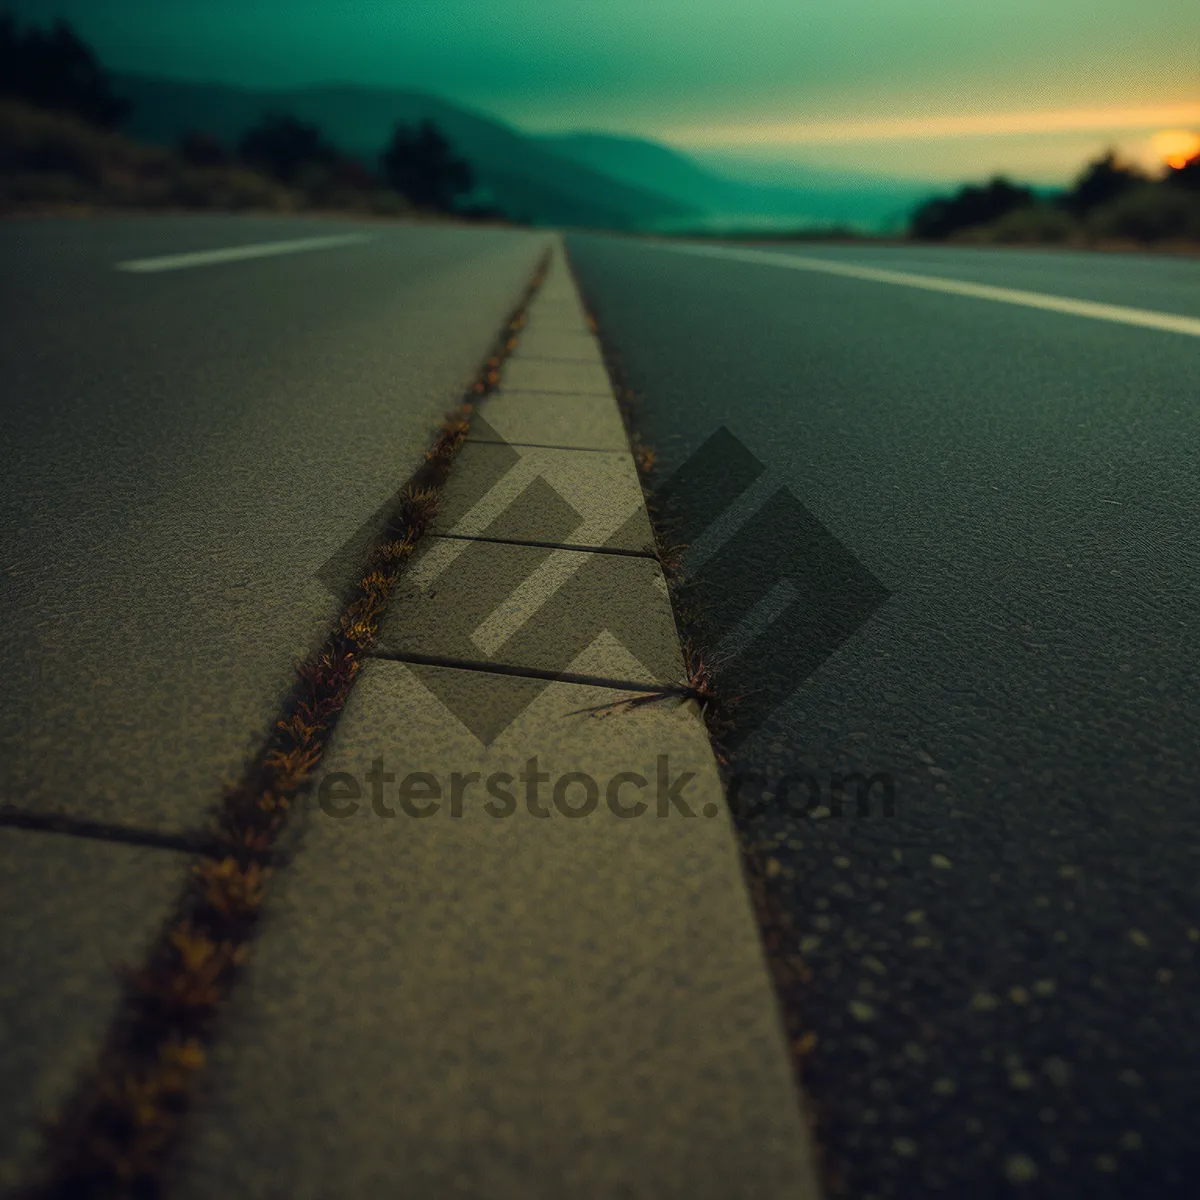 Picture of Endless Road under Expansive Sky